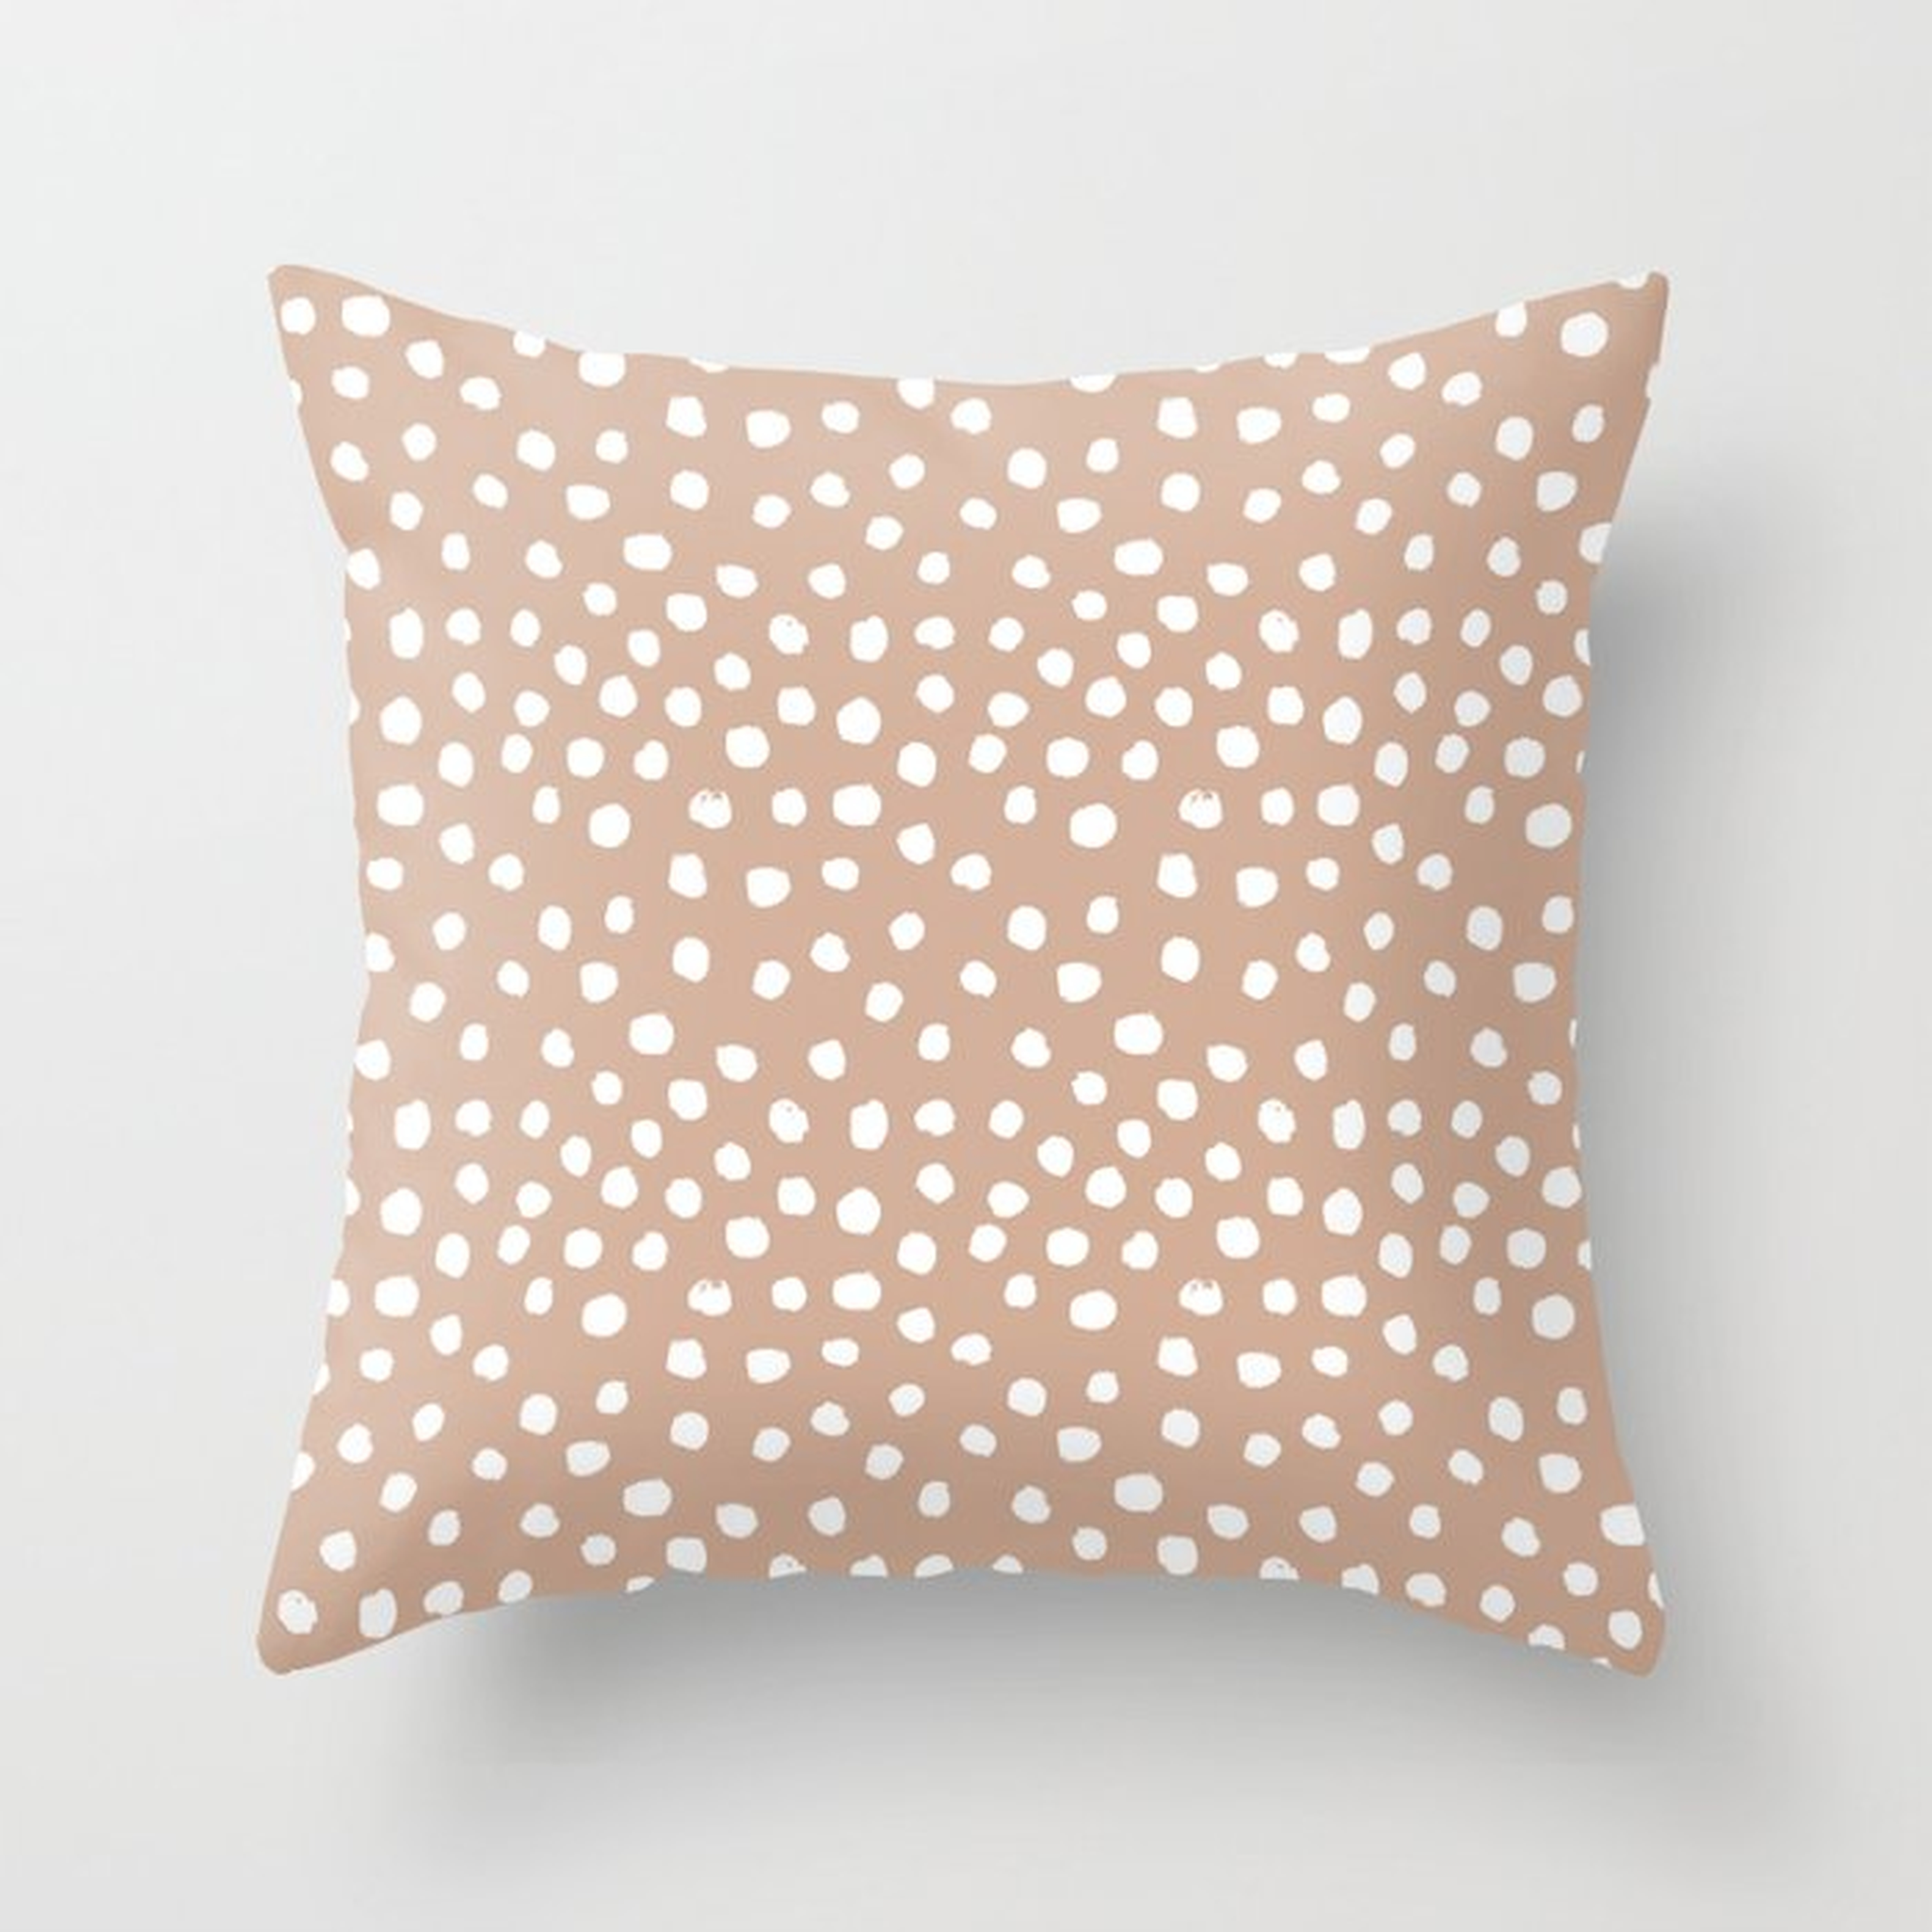 Dots - Almond, Muted, Rust, Earth Tones, Brown, Muted, Painted Dots, Painterly, Minimal, Simple Pattern Throw Pillow by Charlottewinter - Cover (18" x 18") With Pillow Insert - Indoor Pillow - Society6